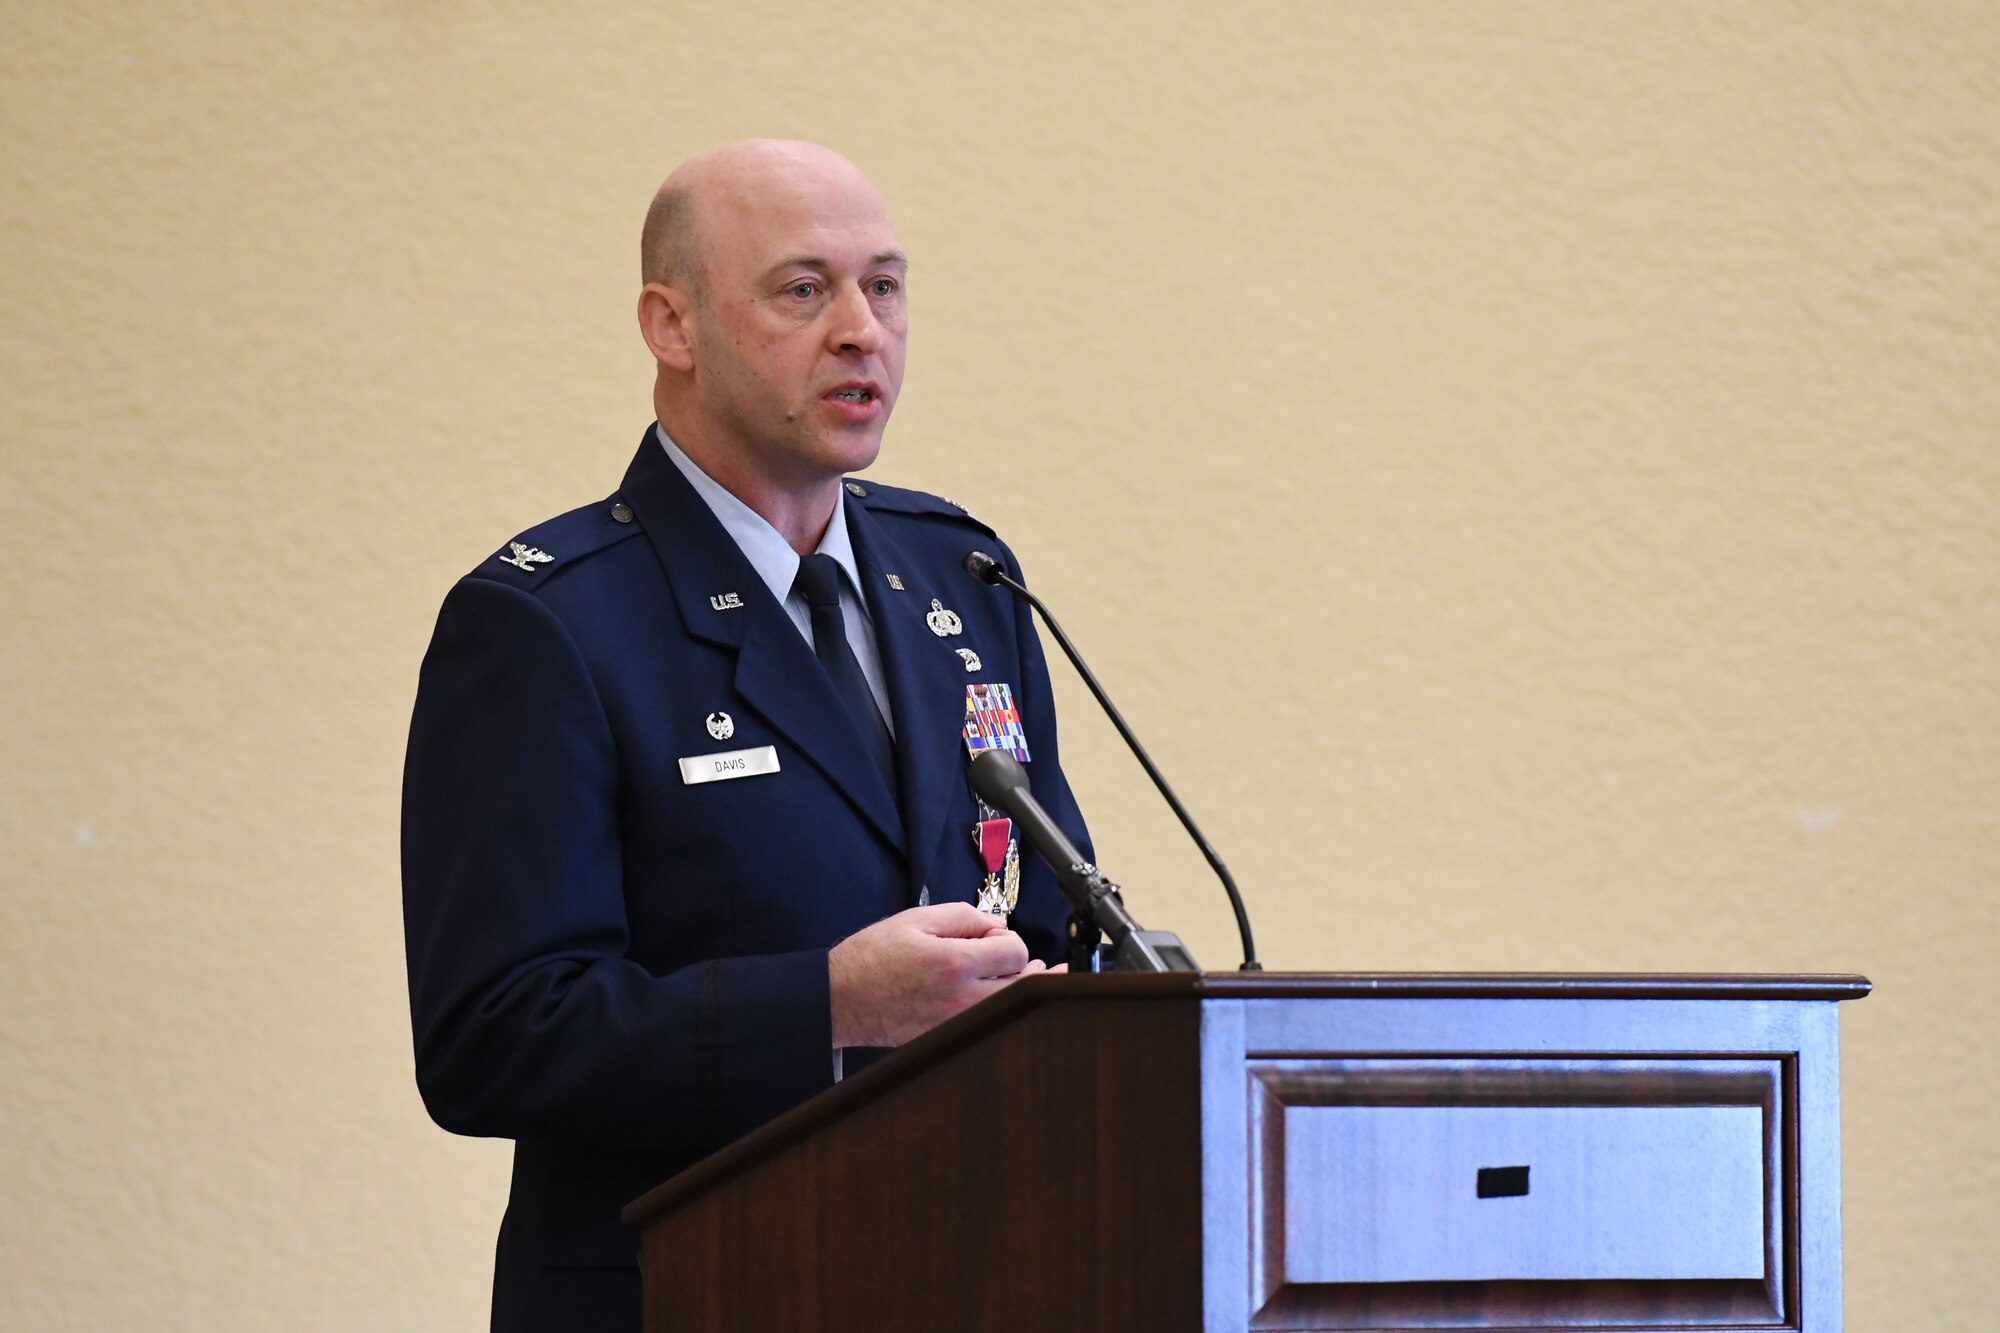 U.S. Air Force Col. Danny Davis, outgoing 81st Mission Support Group commander, delivers remarks during the 81st MSG change of command ceremony in the Bay Breeze Event Center at Keesler Air Force Base, Mississippi, July 19, 2018. Davis relinquished command of the 81st MSG and will be assigned to 2nd Air Force until he retires in September 2018, with more than 24 years of military service. (U.S. Air Force photo by Kemberly Groue)